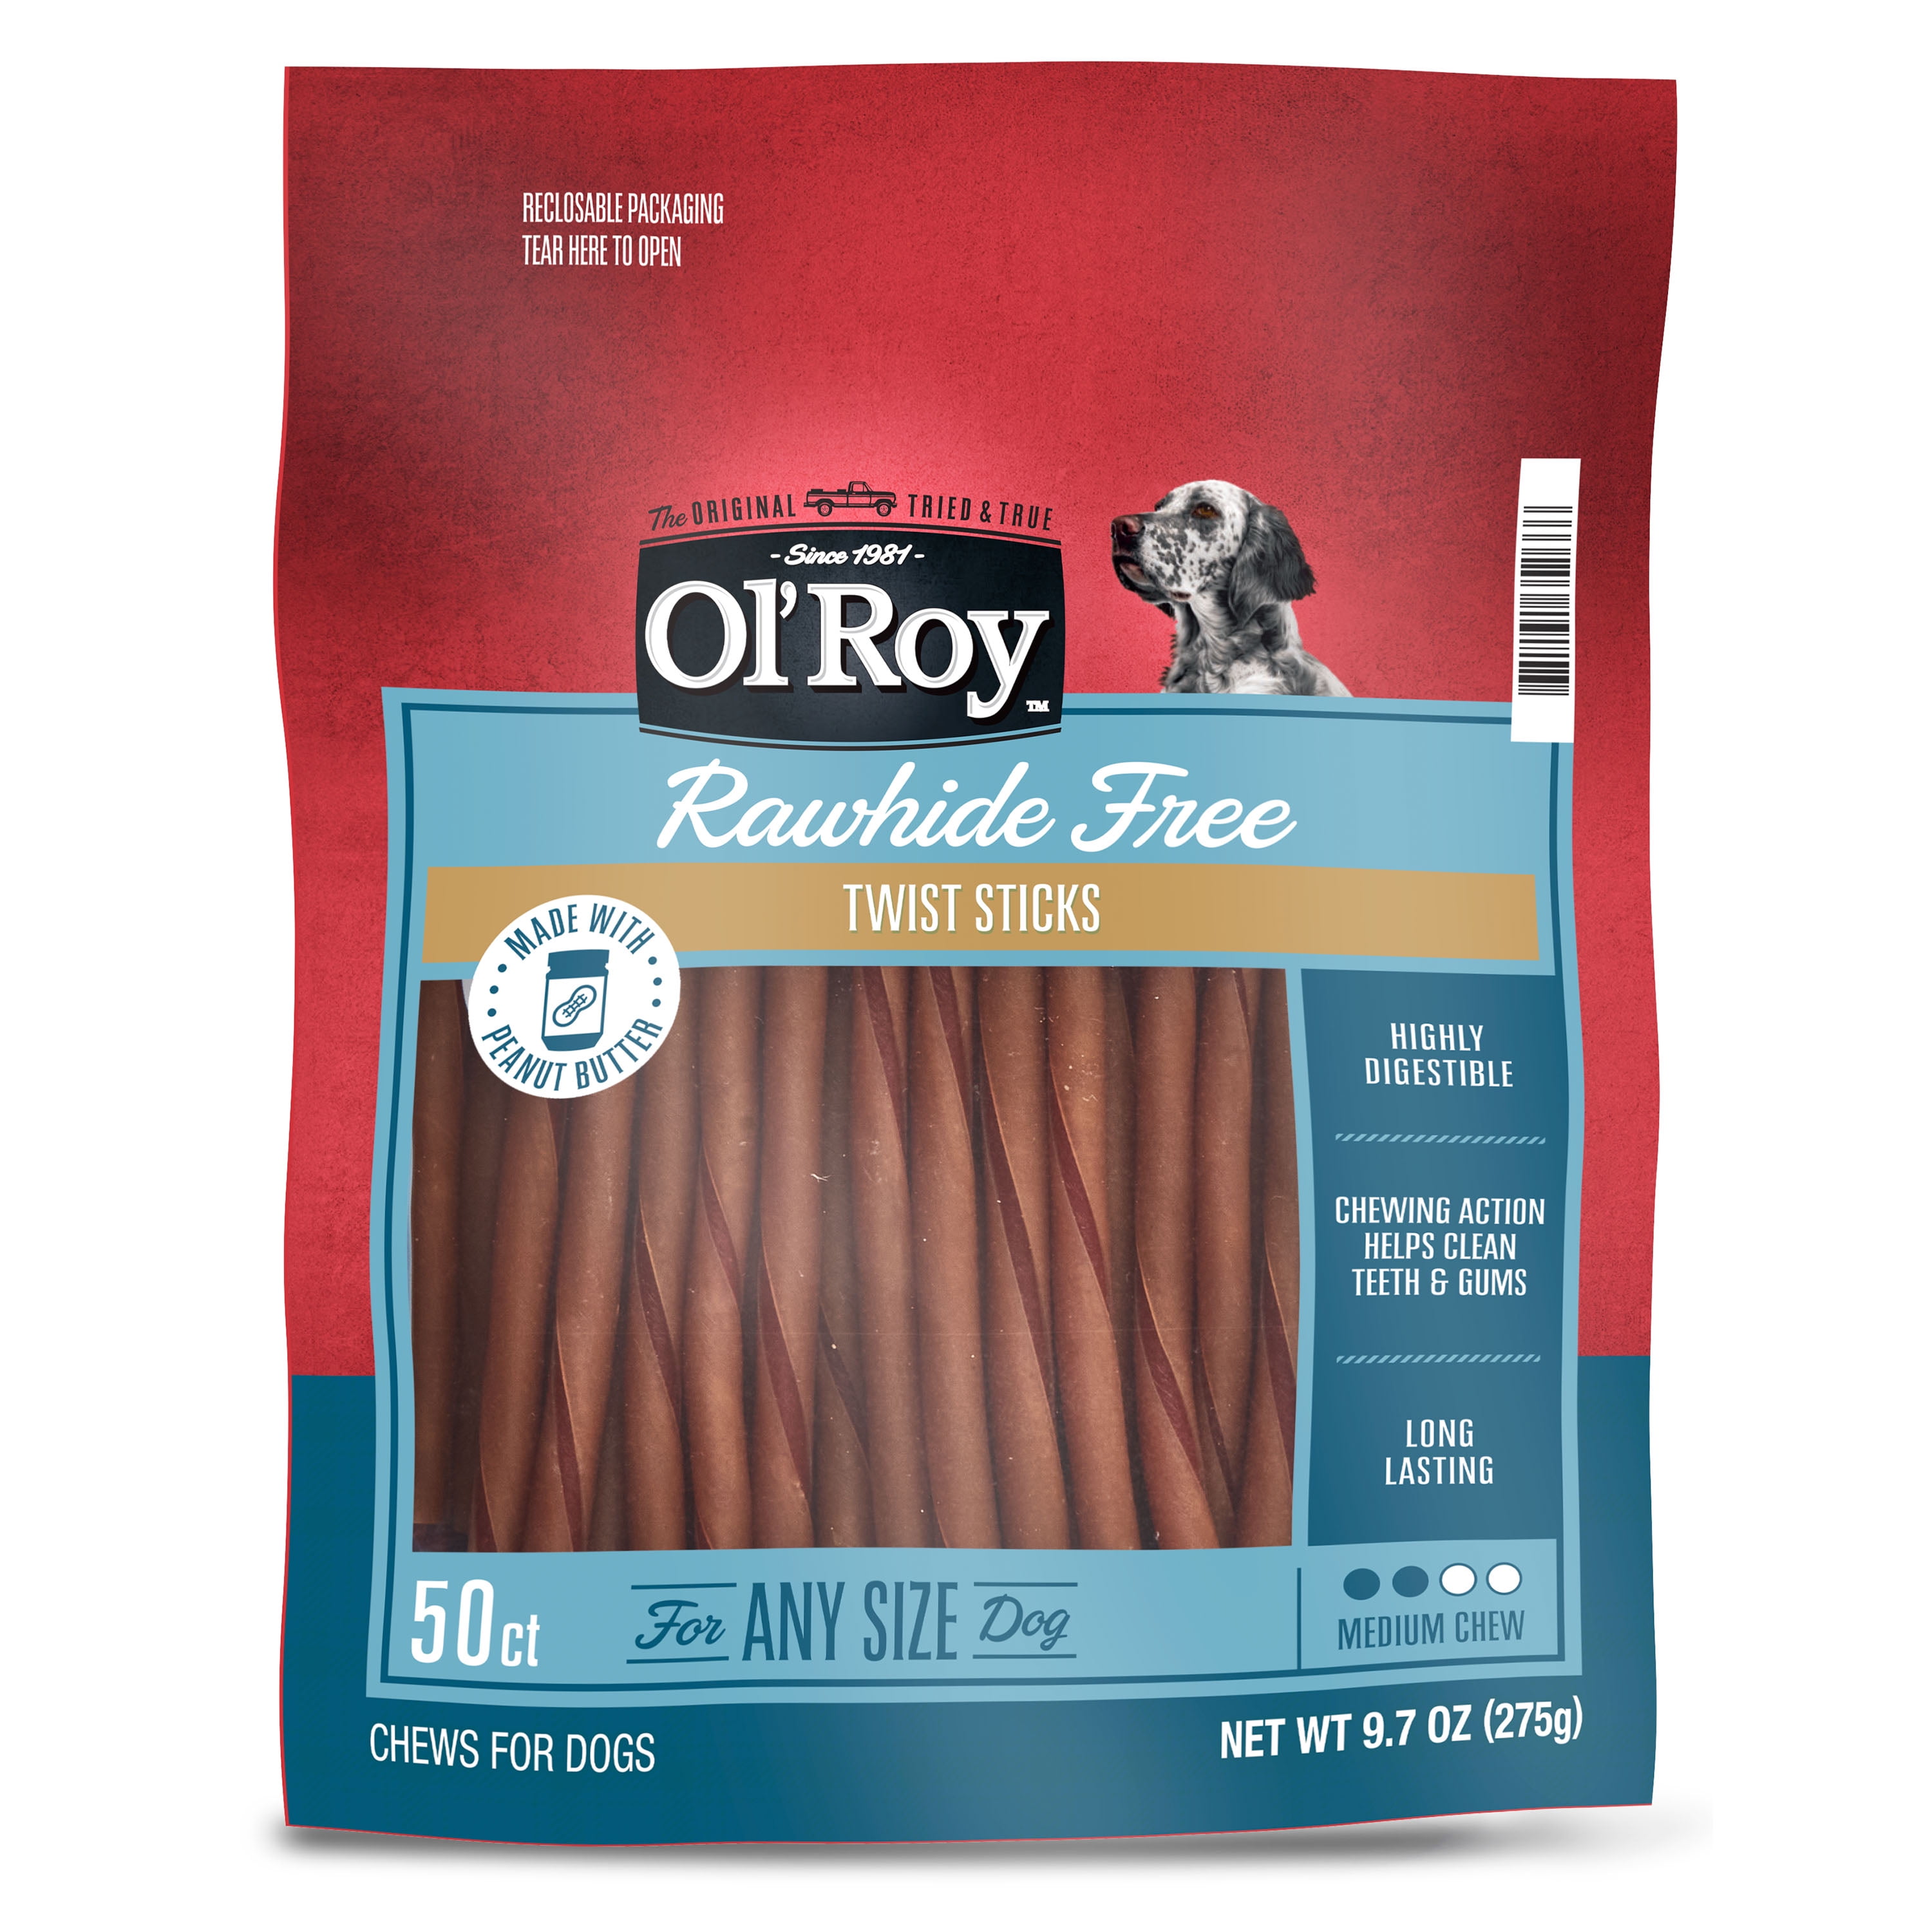 Ol' Roy Rawhide Free Peanut Butter Twist Sticks for Dogs, 50 Count